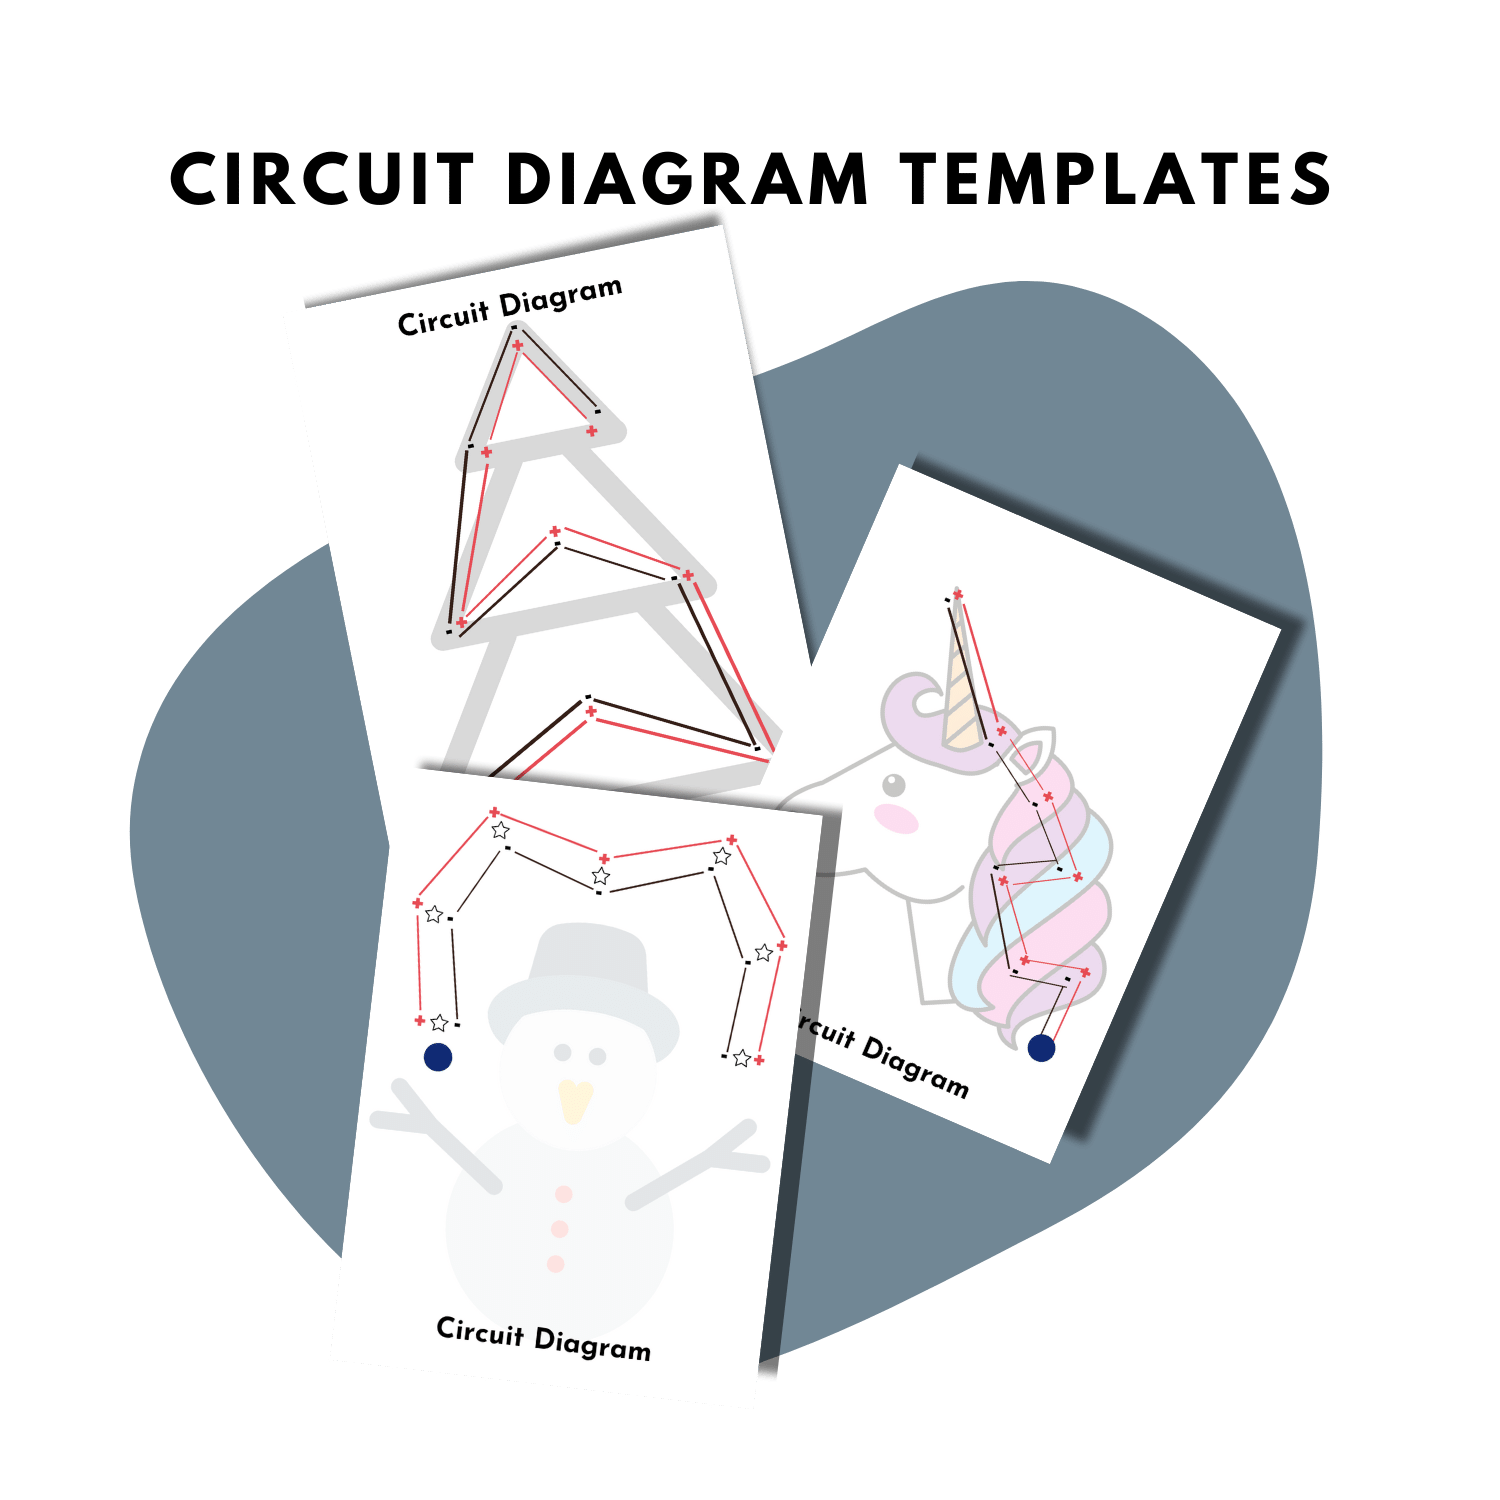 circuit diagrams of Christmas tree unicorn and snowman for LED circuit activity of kids